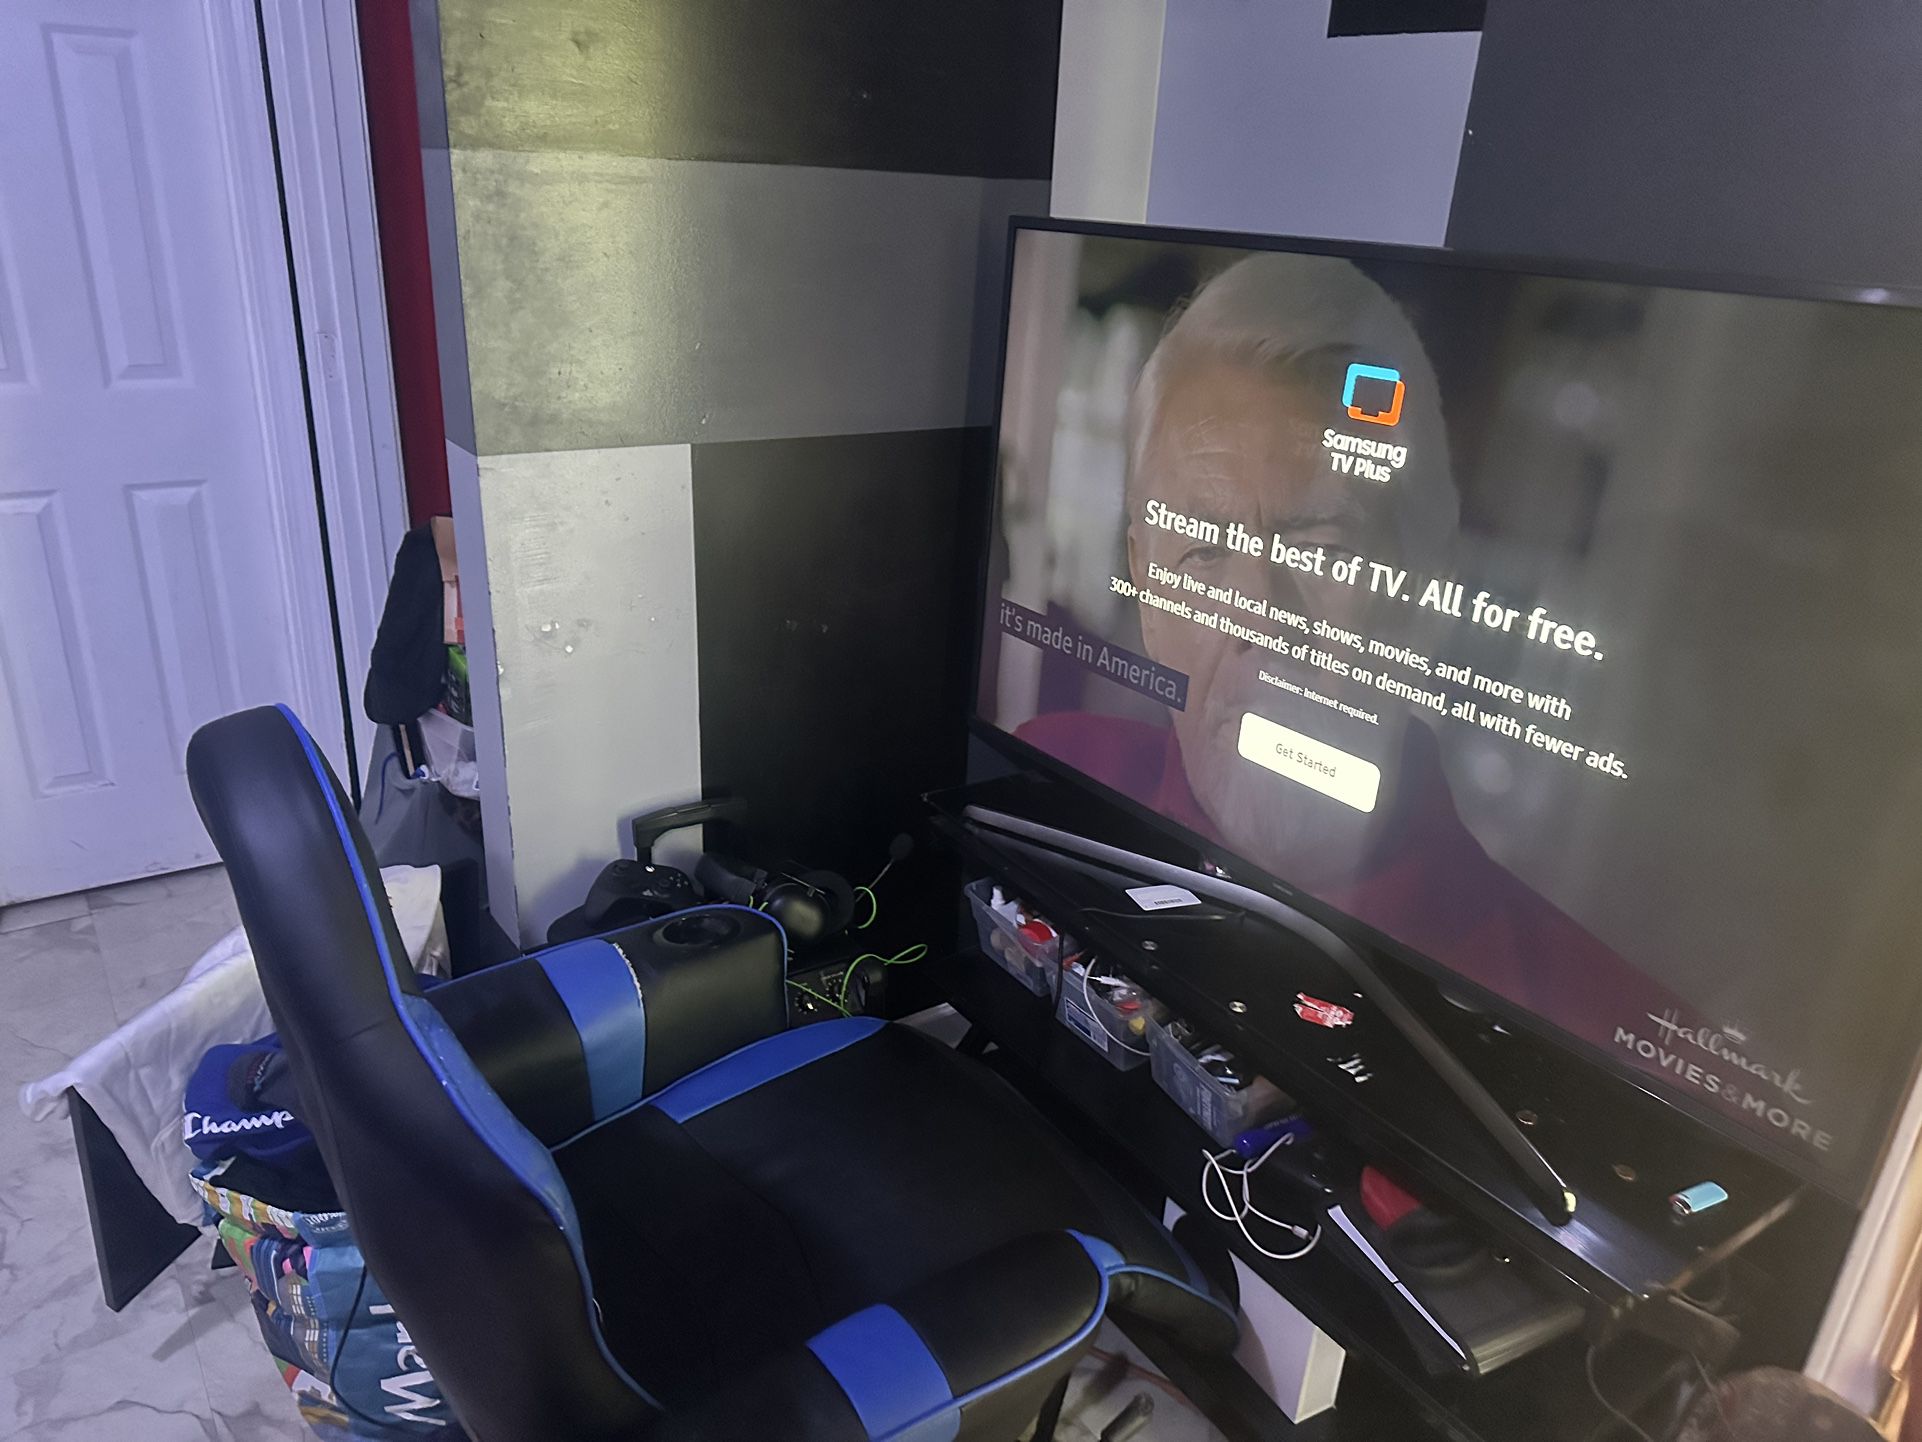 Gaming Chair/massager With 55 Inch Samsung 4k Tv